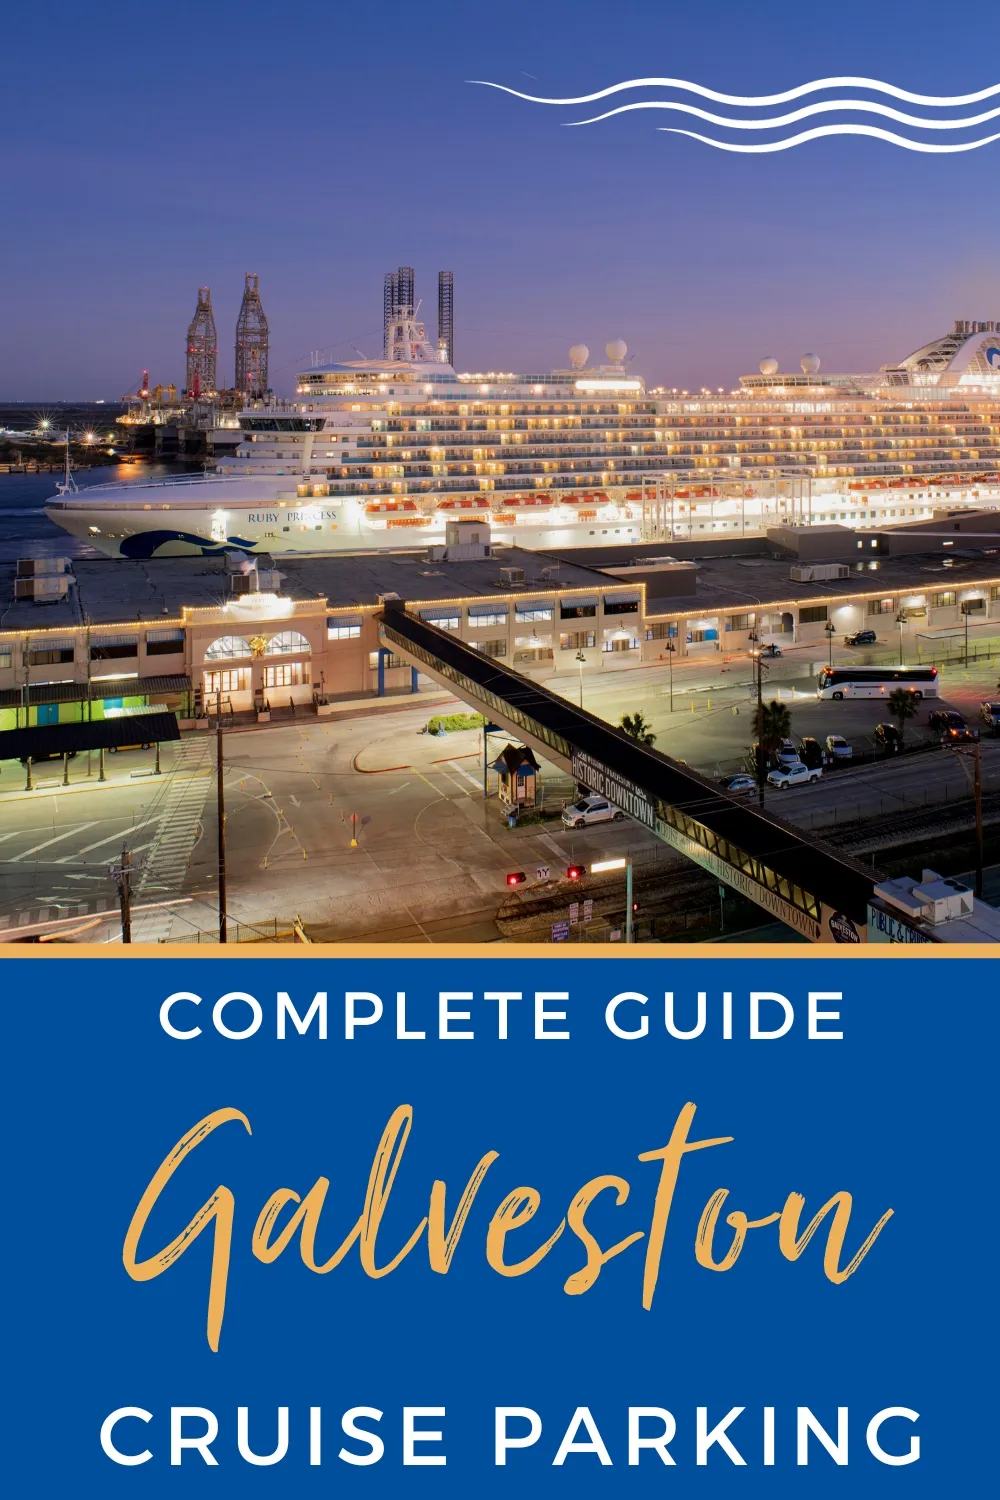 Complete Guide to Cruise Parking in Galveston Cruise Port